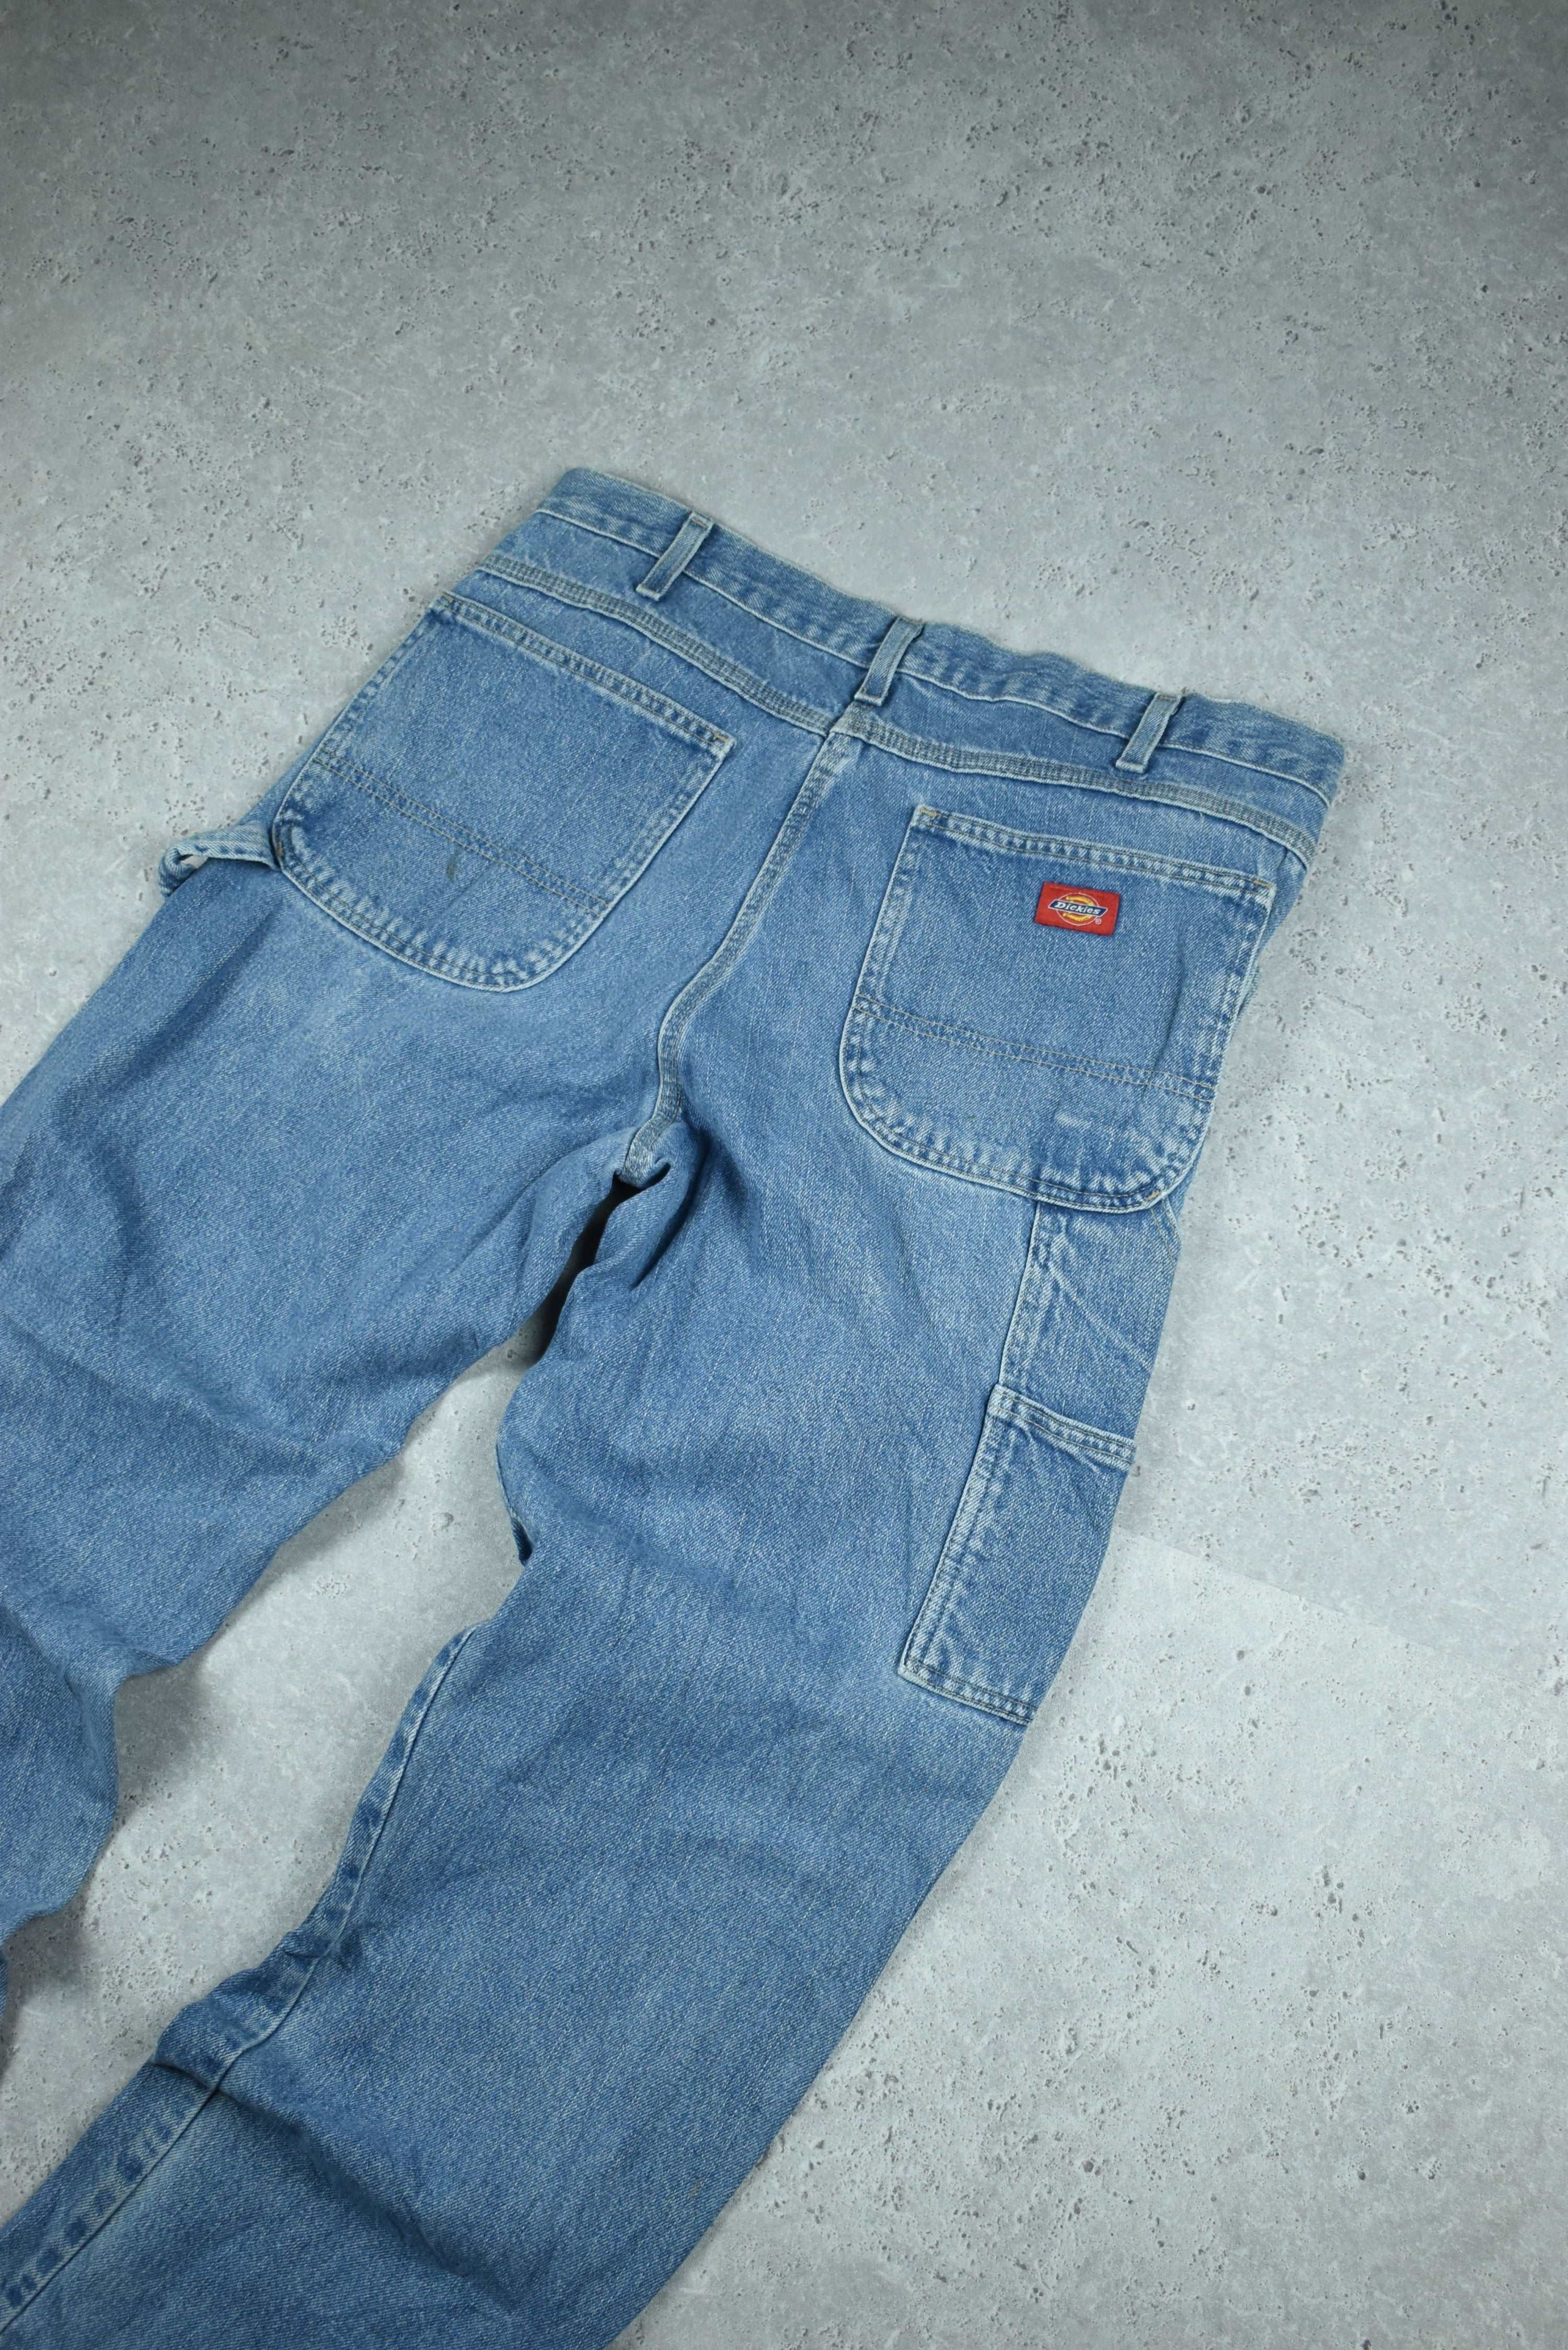 Vintage Dickies Relaxed Fit Denim Jeans 36x32